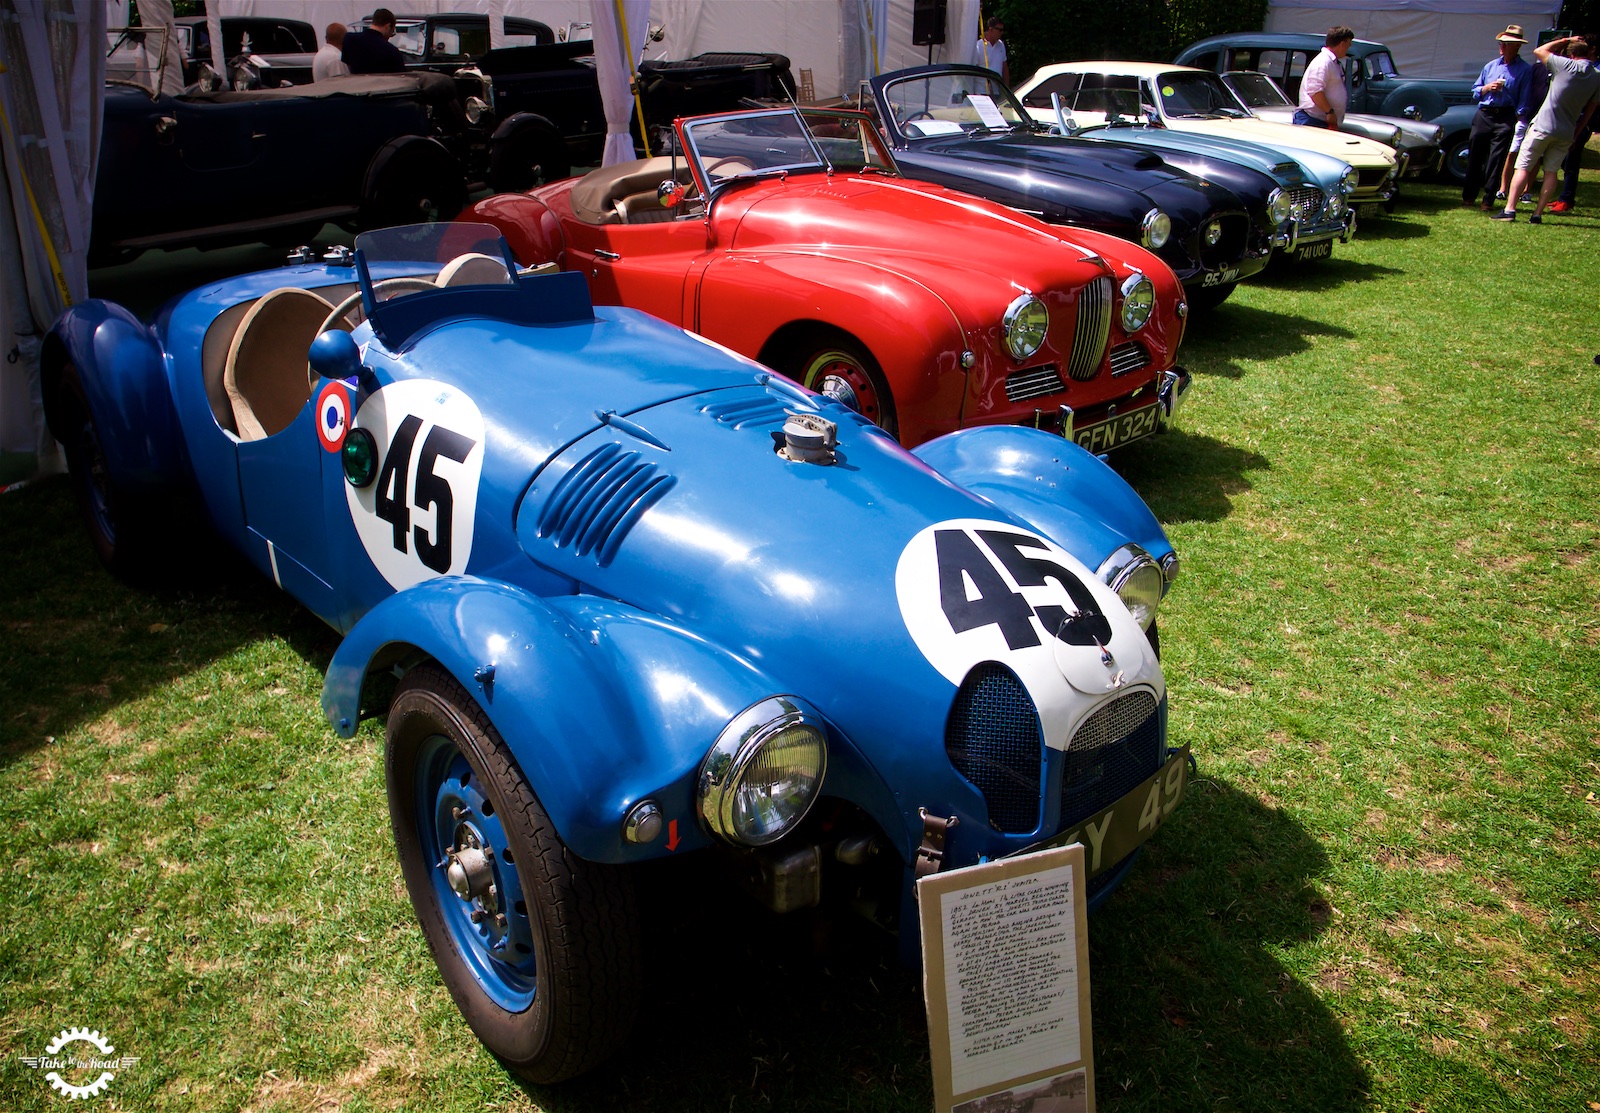 Two Weeks to the Belgravia Classic Car Show 2019